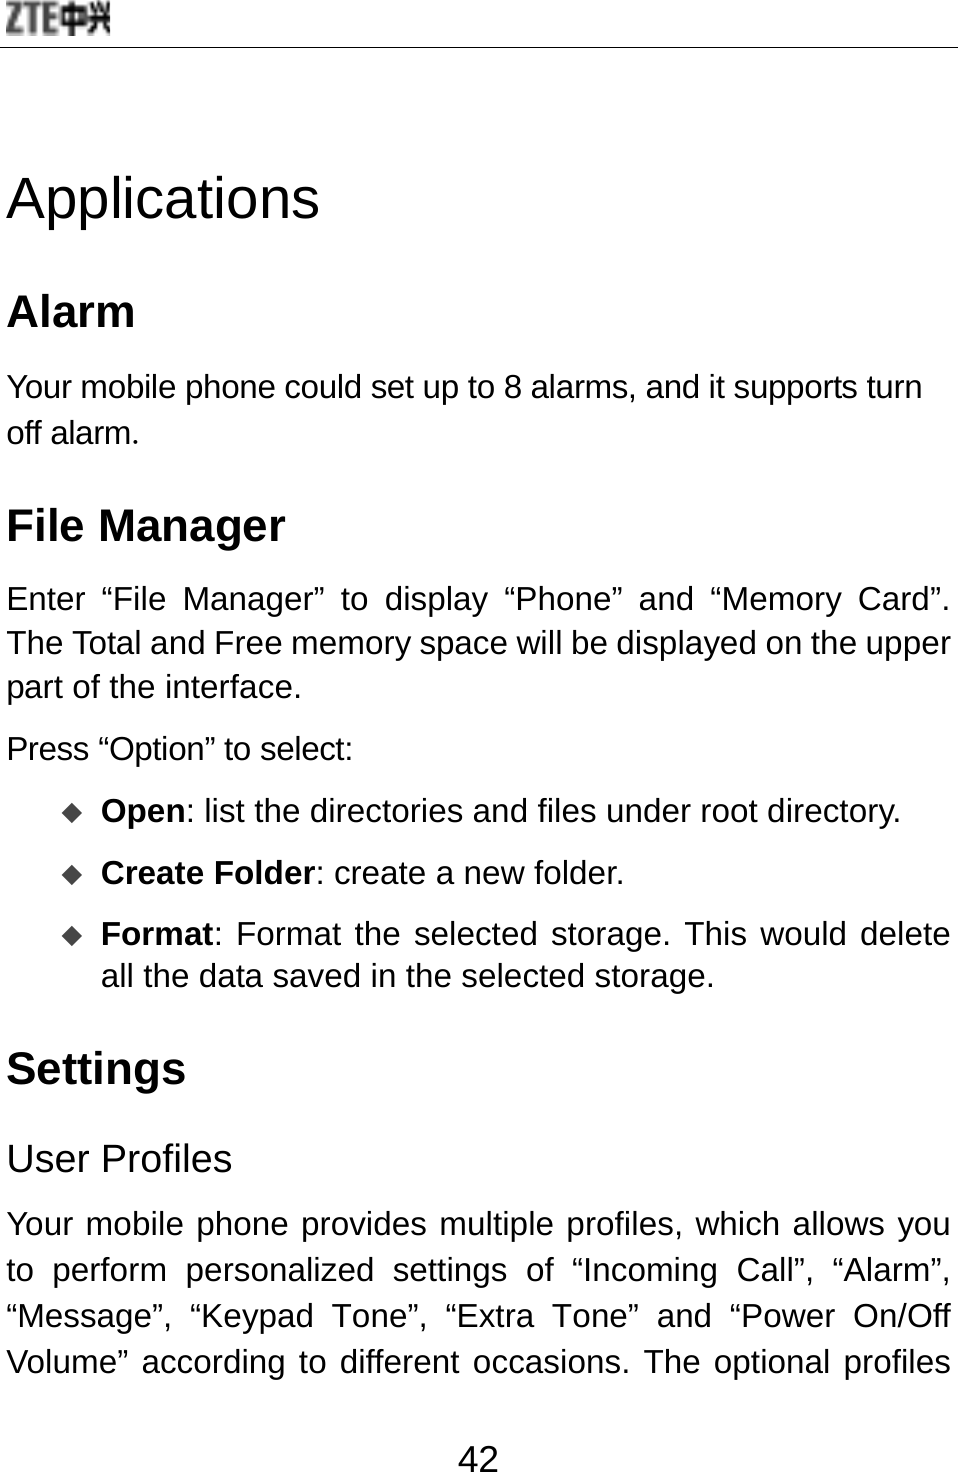  42 Applications Alarm Your mobile phone could set up to 8 alarms, and it supports turn off alarm. File Manager Enter “File Manager” to display “Phone” and “Memory Card”. The Total and Free memory space will be displayed on the upper part of the interface. Press “Option” to select:    Open: list the directories and files under root directory.  Create Folder: create a new folder.  Format: Format the selected storage. This would delete all the data saved in the selected storage. Settings User Profiles Your mobile phone provides multiple profiles, which allows you to perform personalized settings of “Incoming Call”, “Alarm”, “Message”, “Keypad Tone”, “Extra Tone” and “Power On/Off Volume” according to different occasions. The optional profiles 